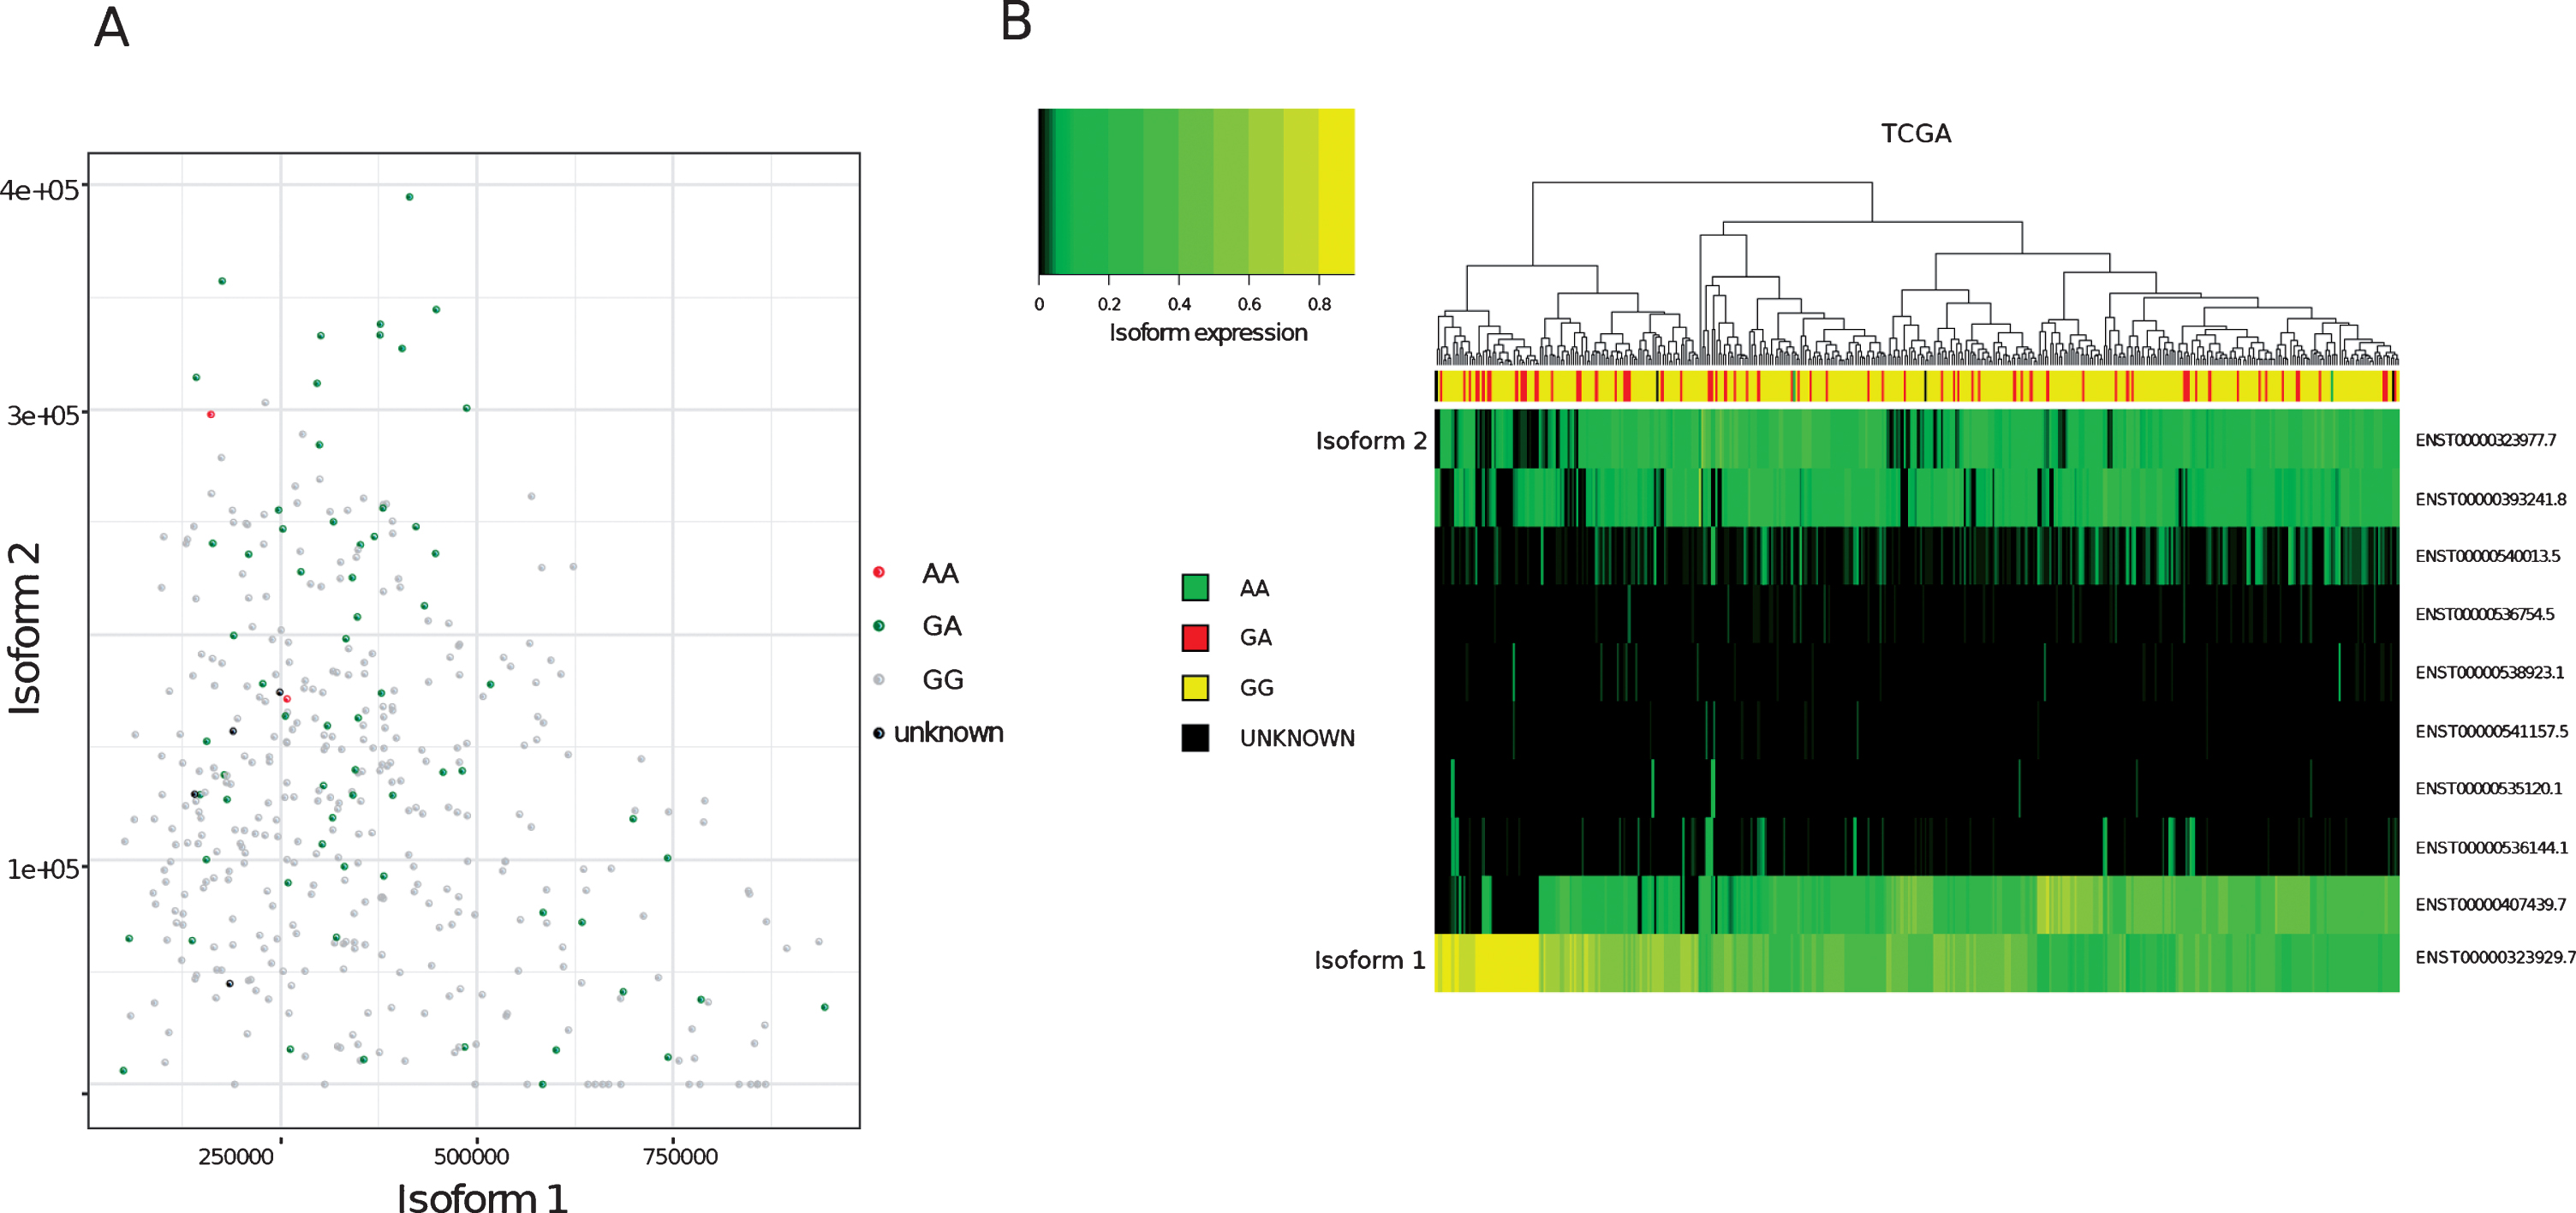 Analysis of MRE11 isoforms in TCGA bladder cancer tumours (A)Expression values (Transcript per million, TPM, computed on reads mapping to MRE11 only) of isoform 1 (x-axis) compared to isoform 2 (y-axis) in TCGA bladder cancer samples. Node colours indicate variant calling for rs1805363.(B)Clustering of MRE11 isoforms. Colour intensity refers to percentage of isoform usage.